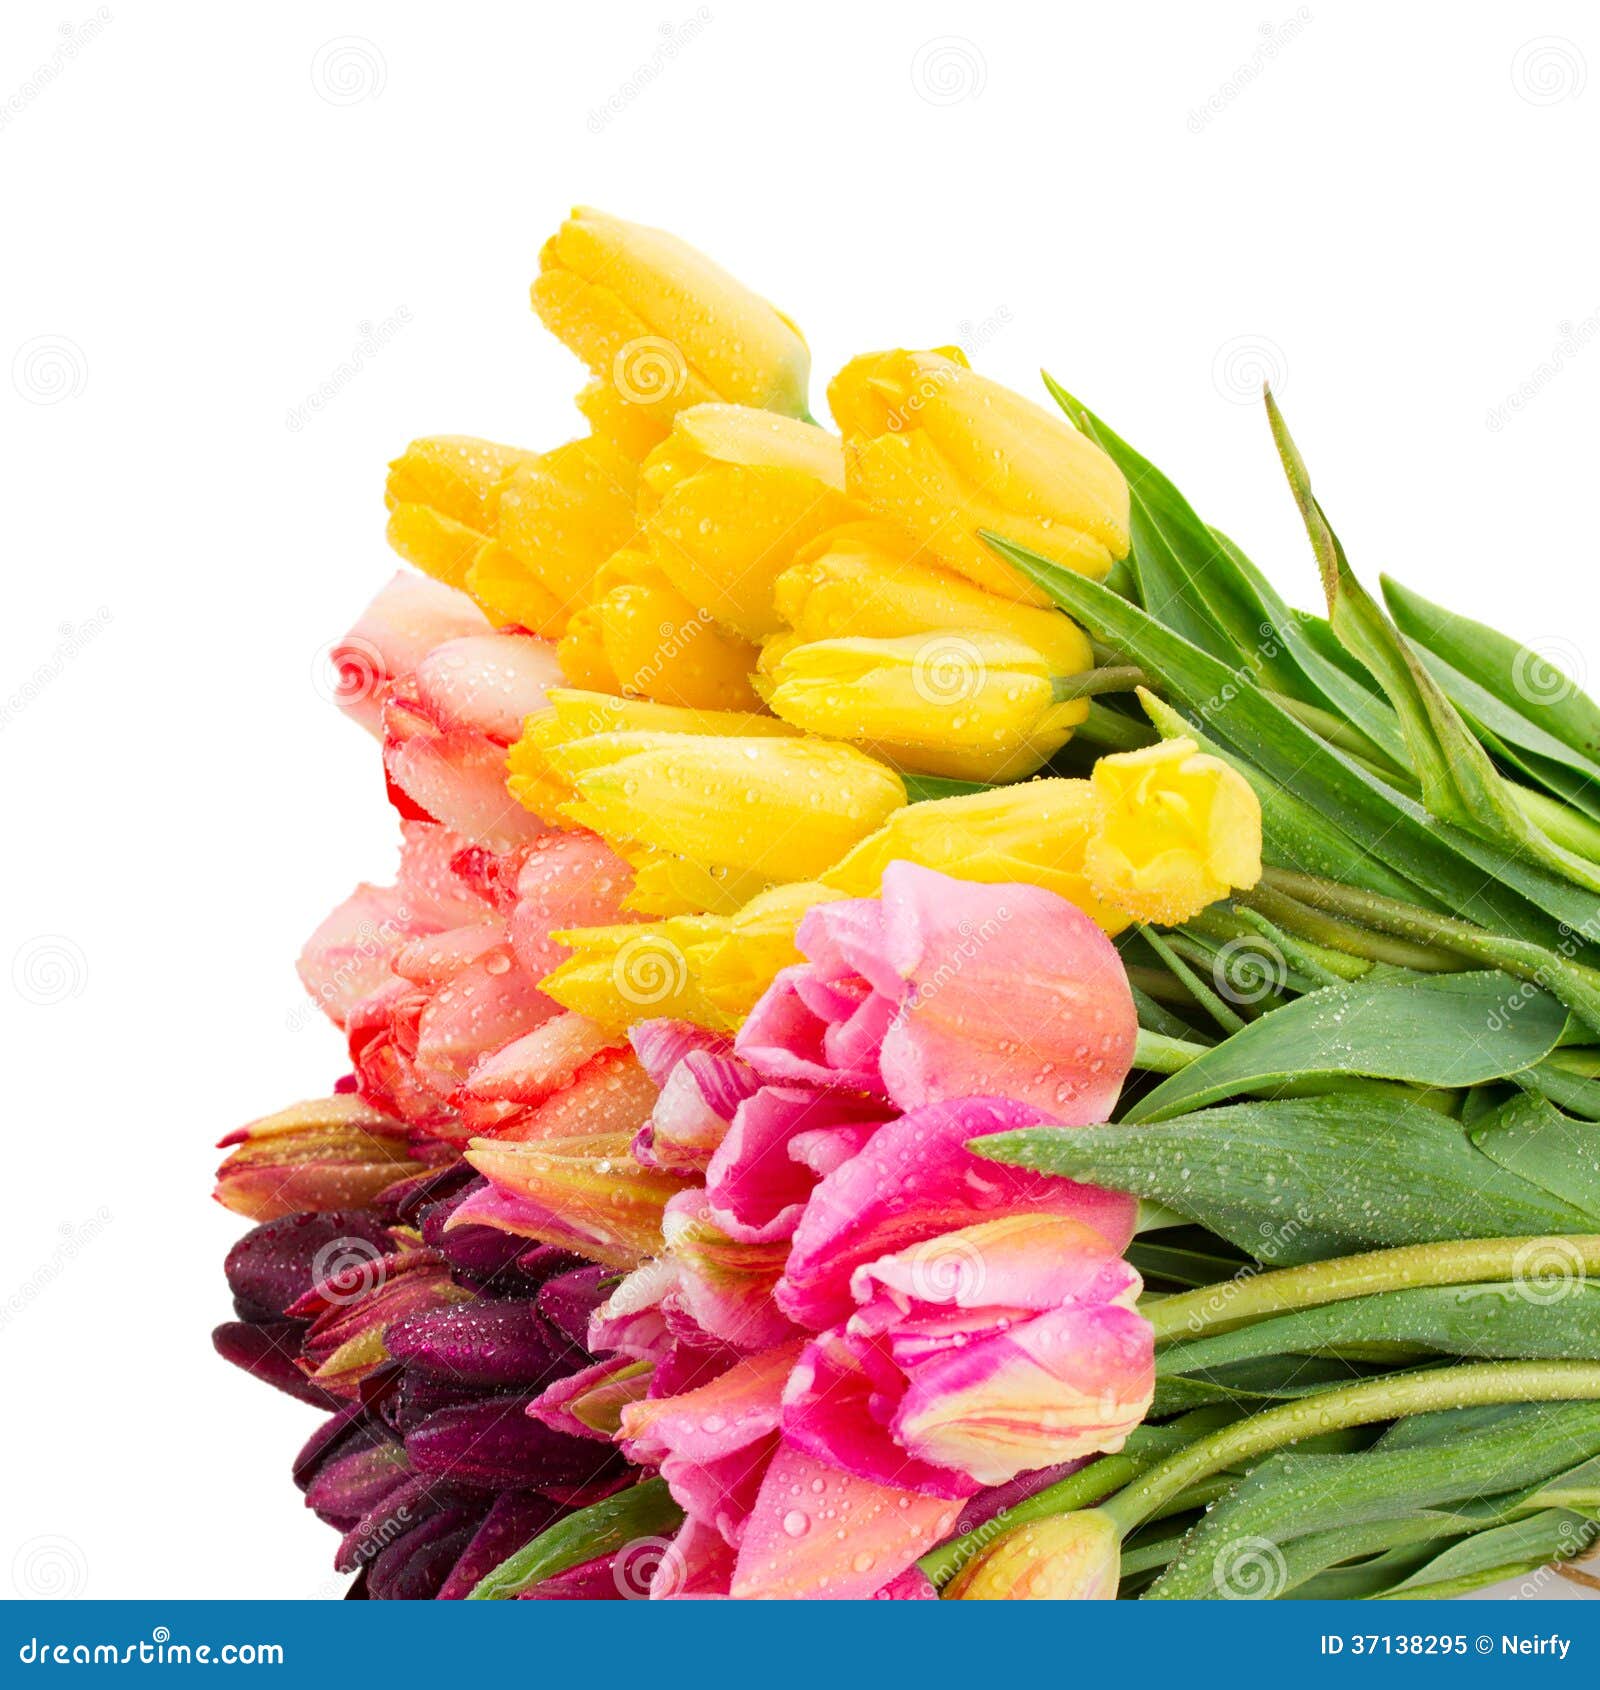 Bunch of Tulips Flowers Close Up Stock Image - Image of nature, present ...